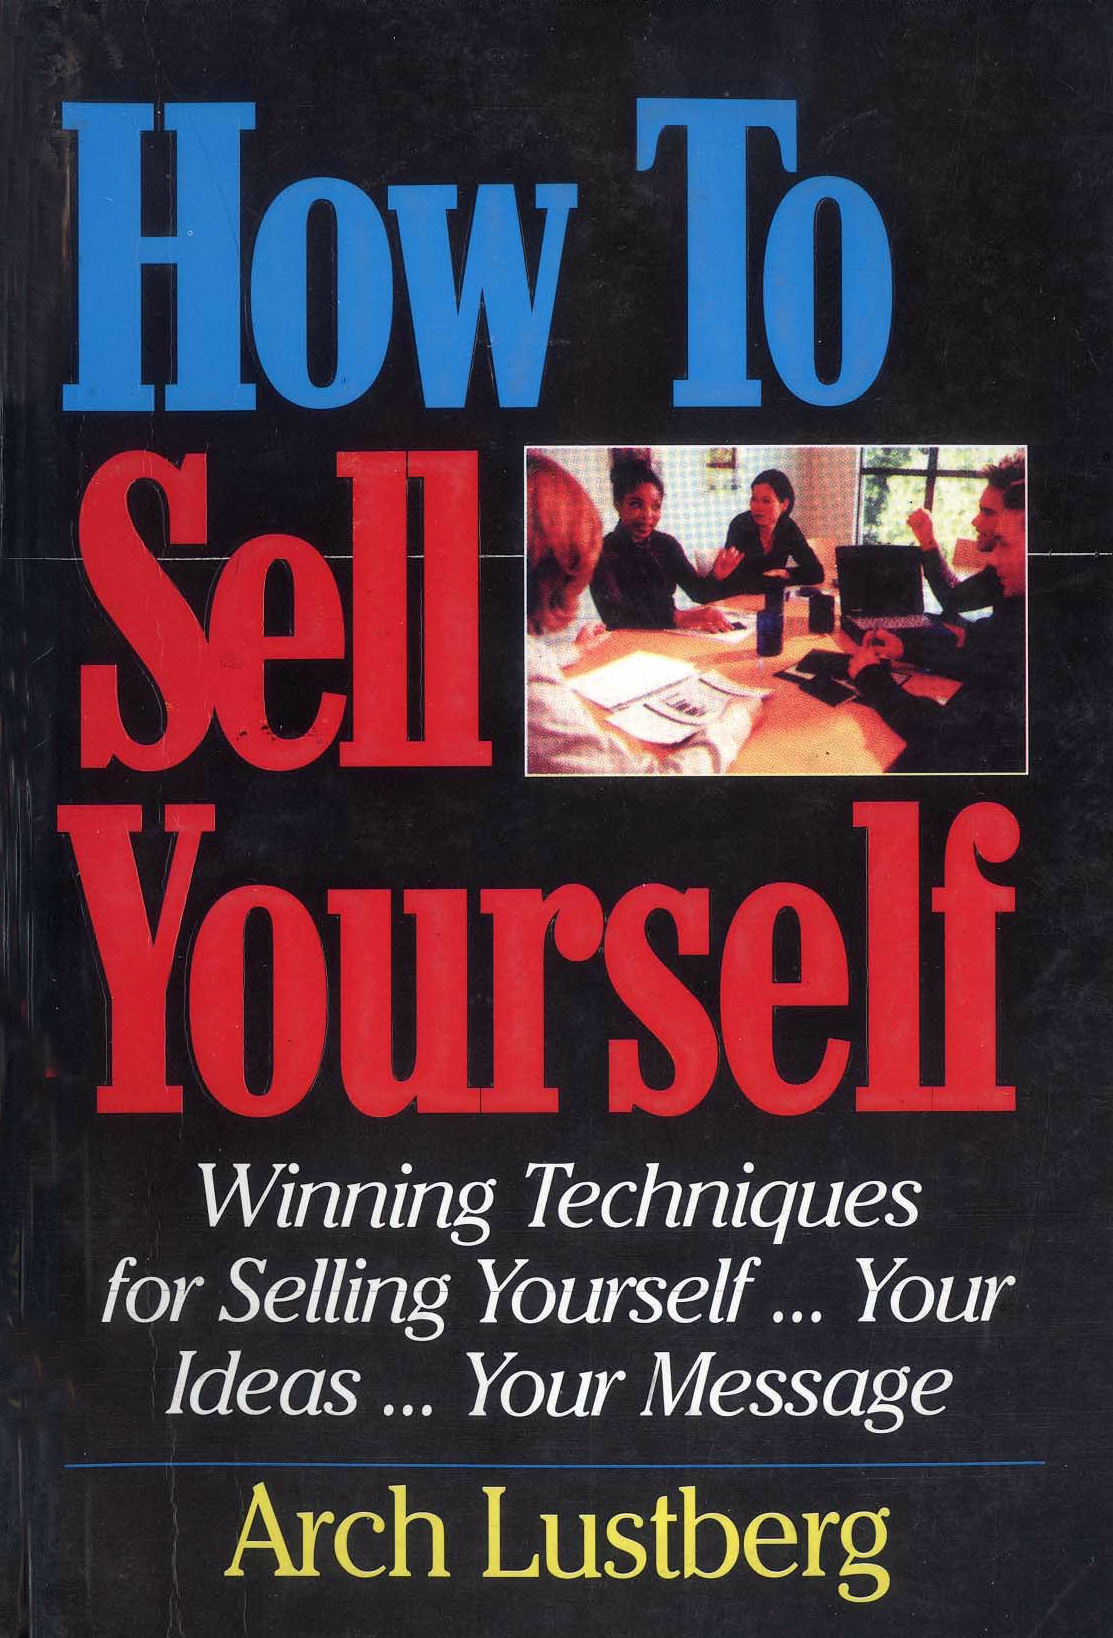 How-to-sell-yourself